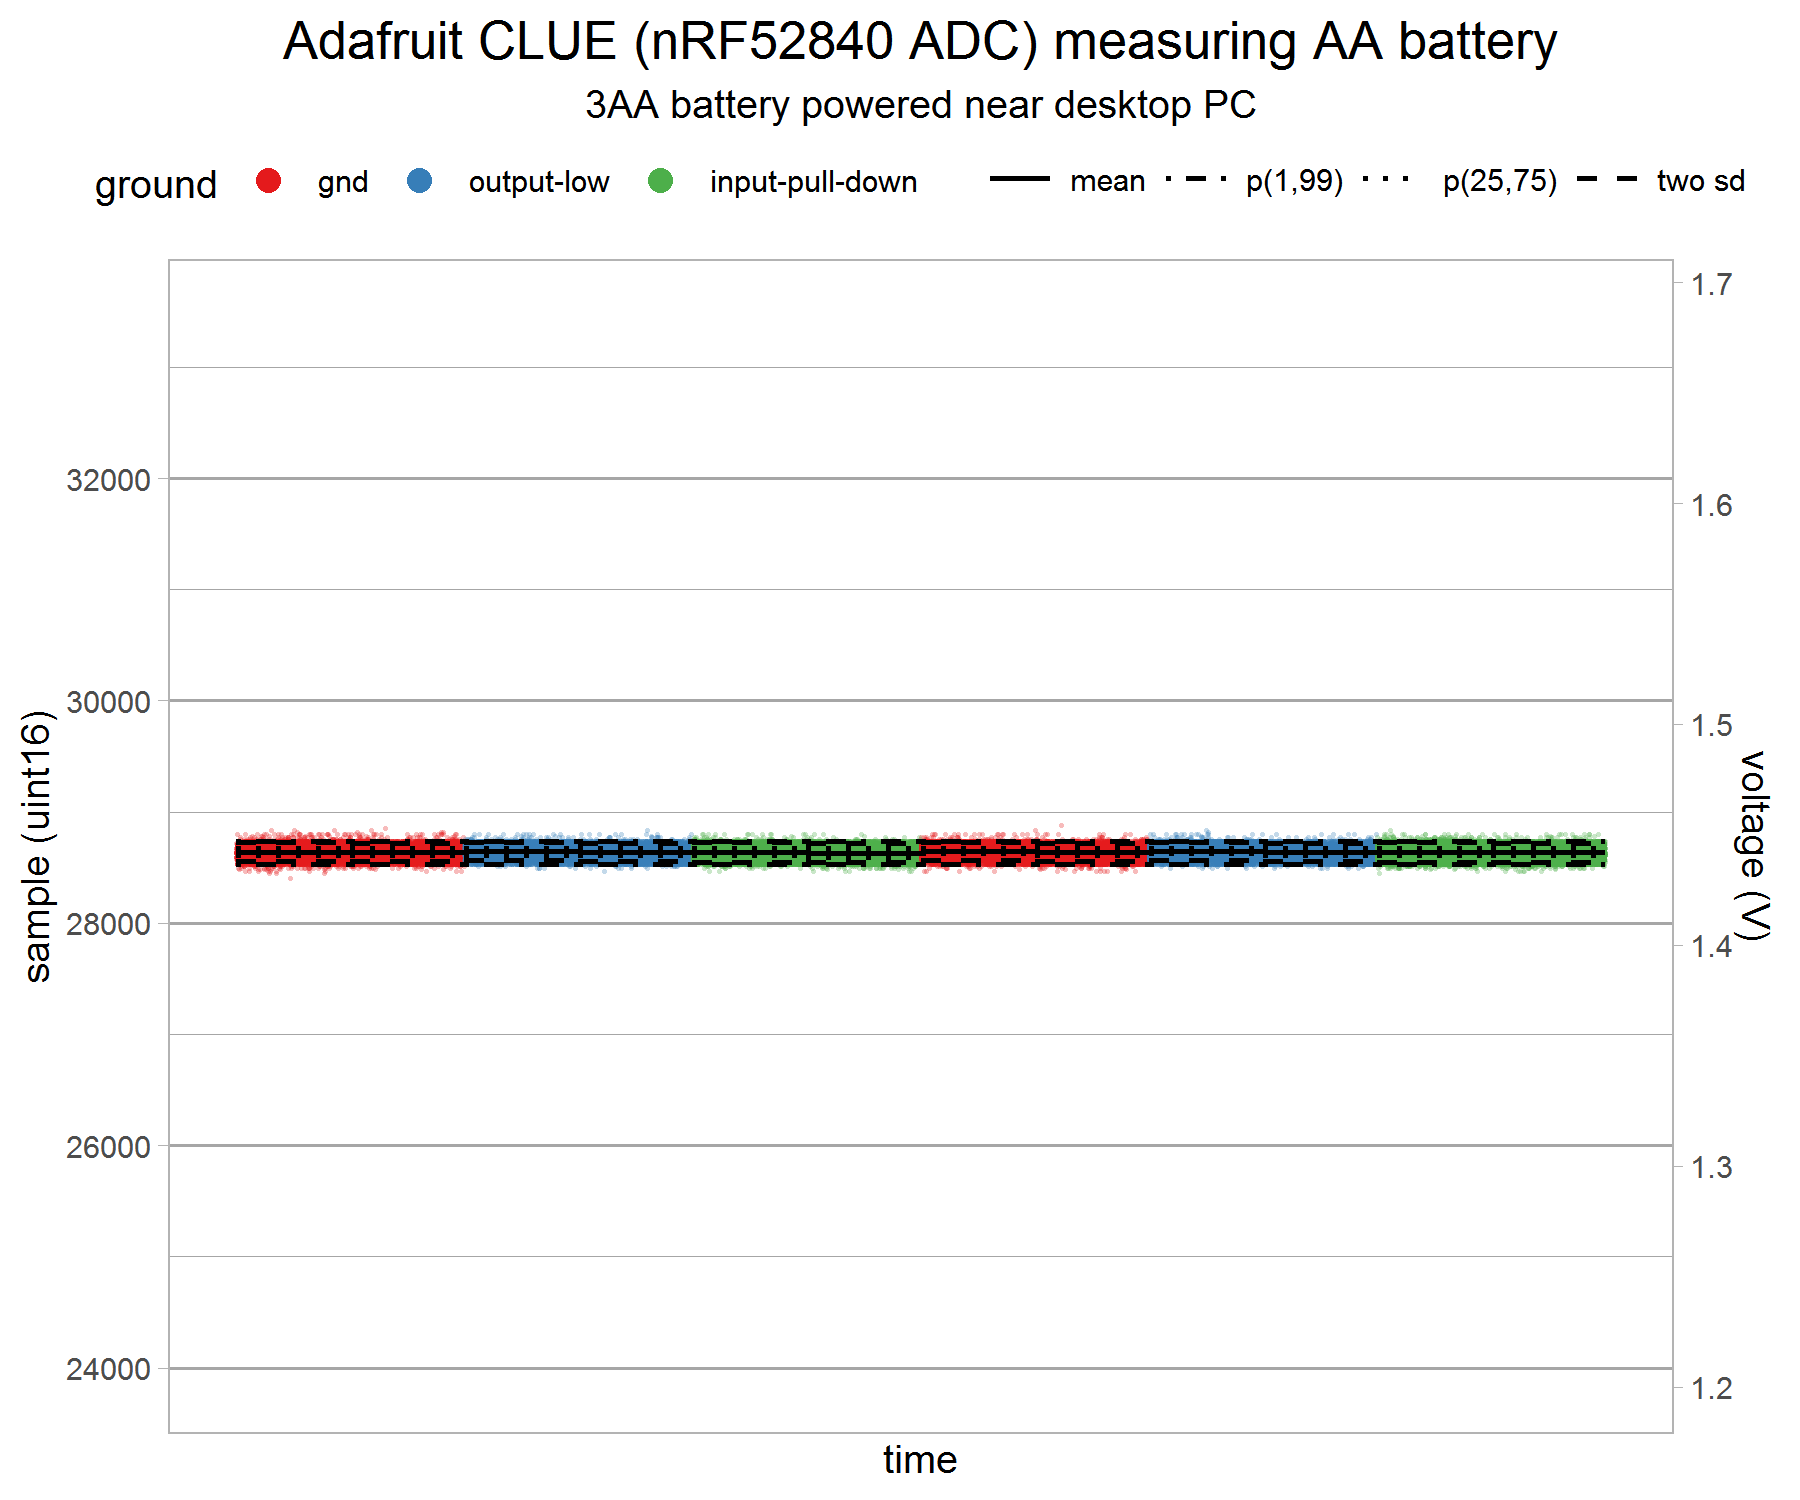 clue-adc-logger-at-desk-3aa-powered-3-wide-v3-g1.png